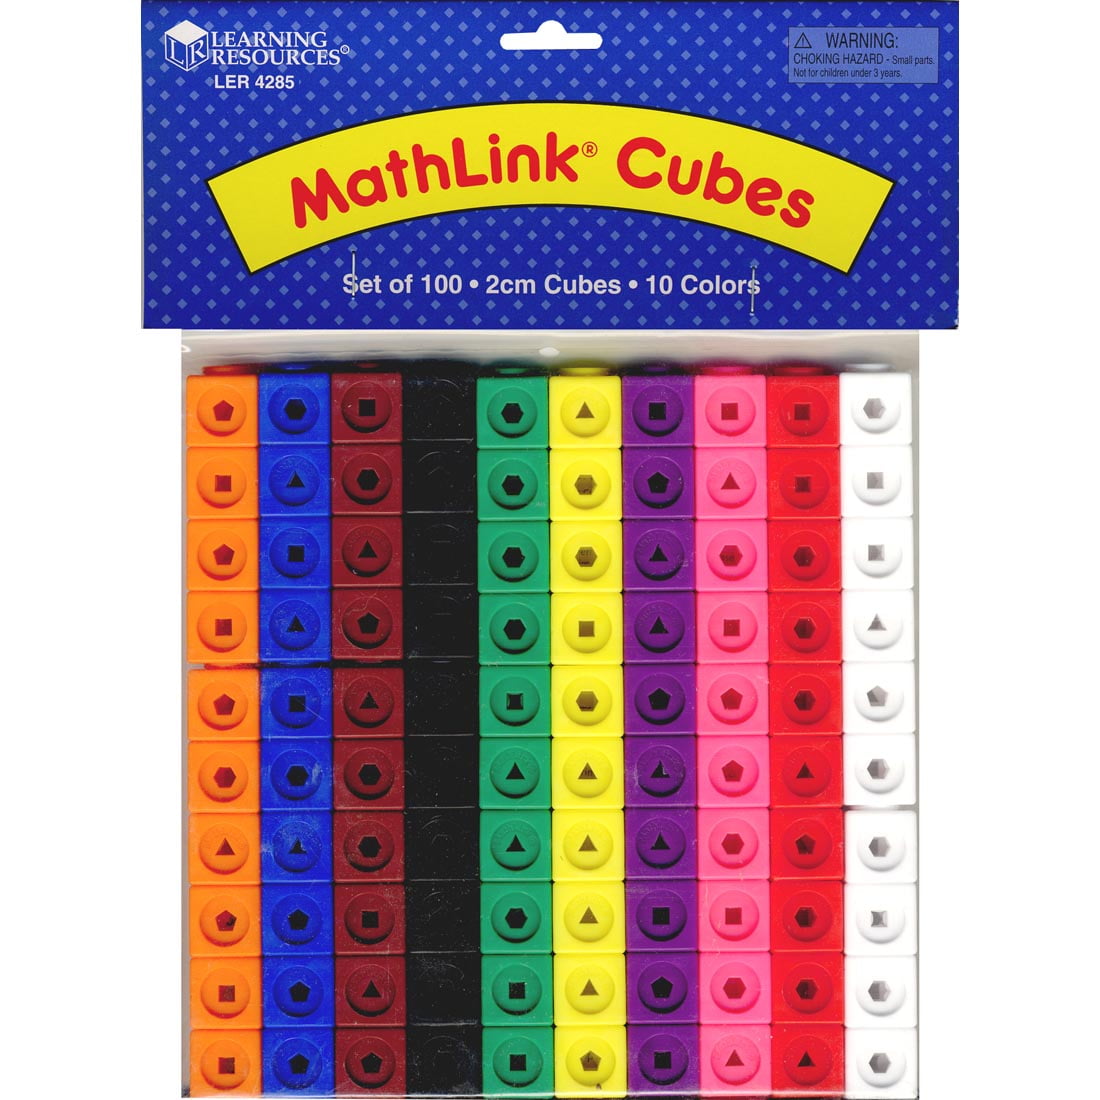 Linking Cubes 2cm Educational Resource for Kids Teachers School Resources 